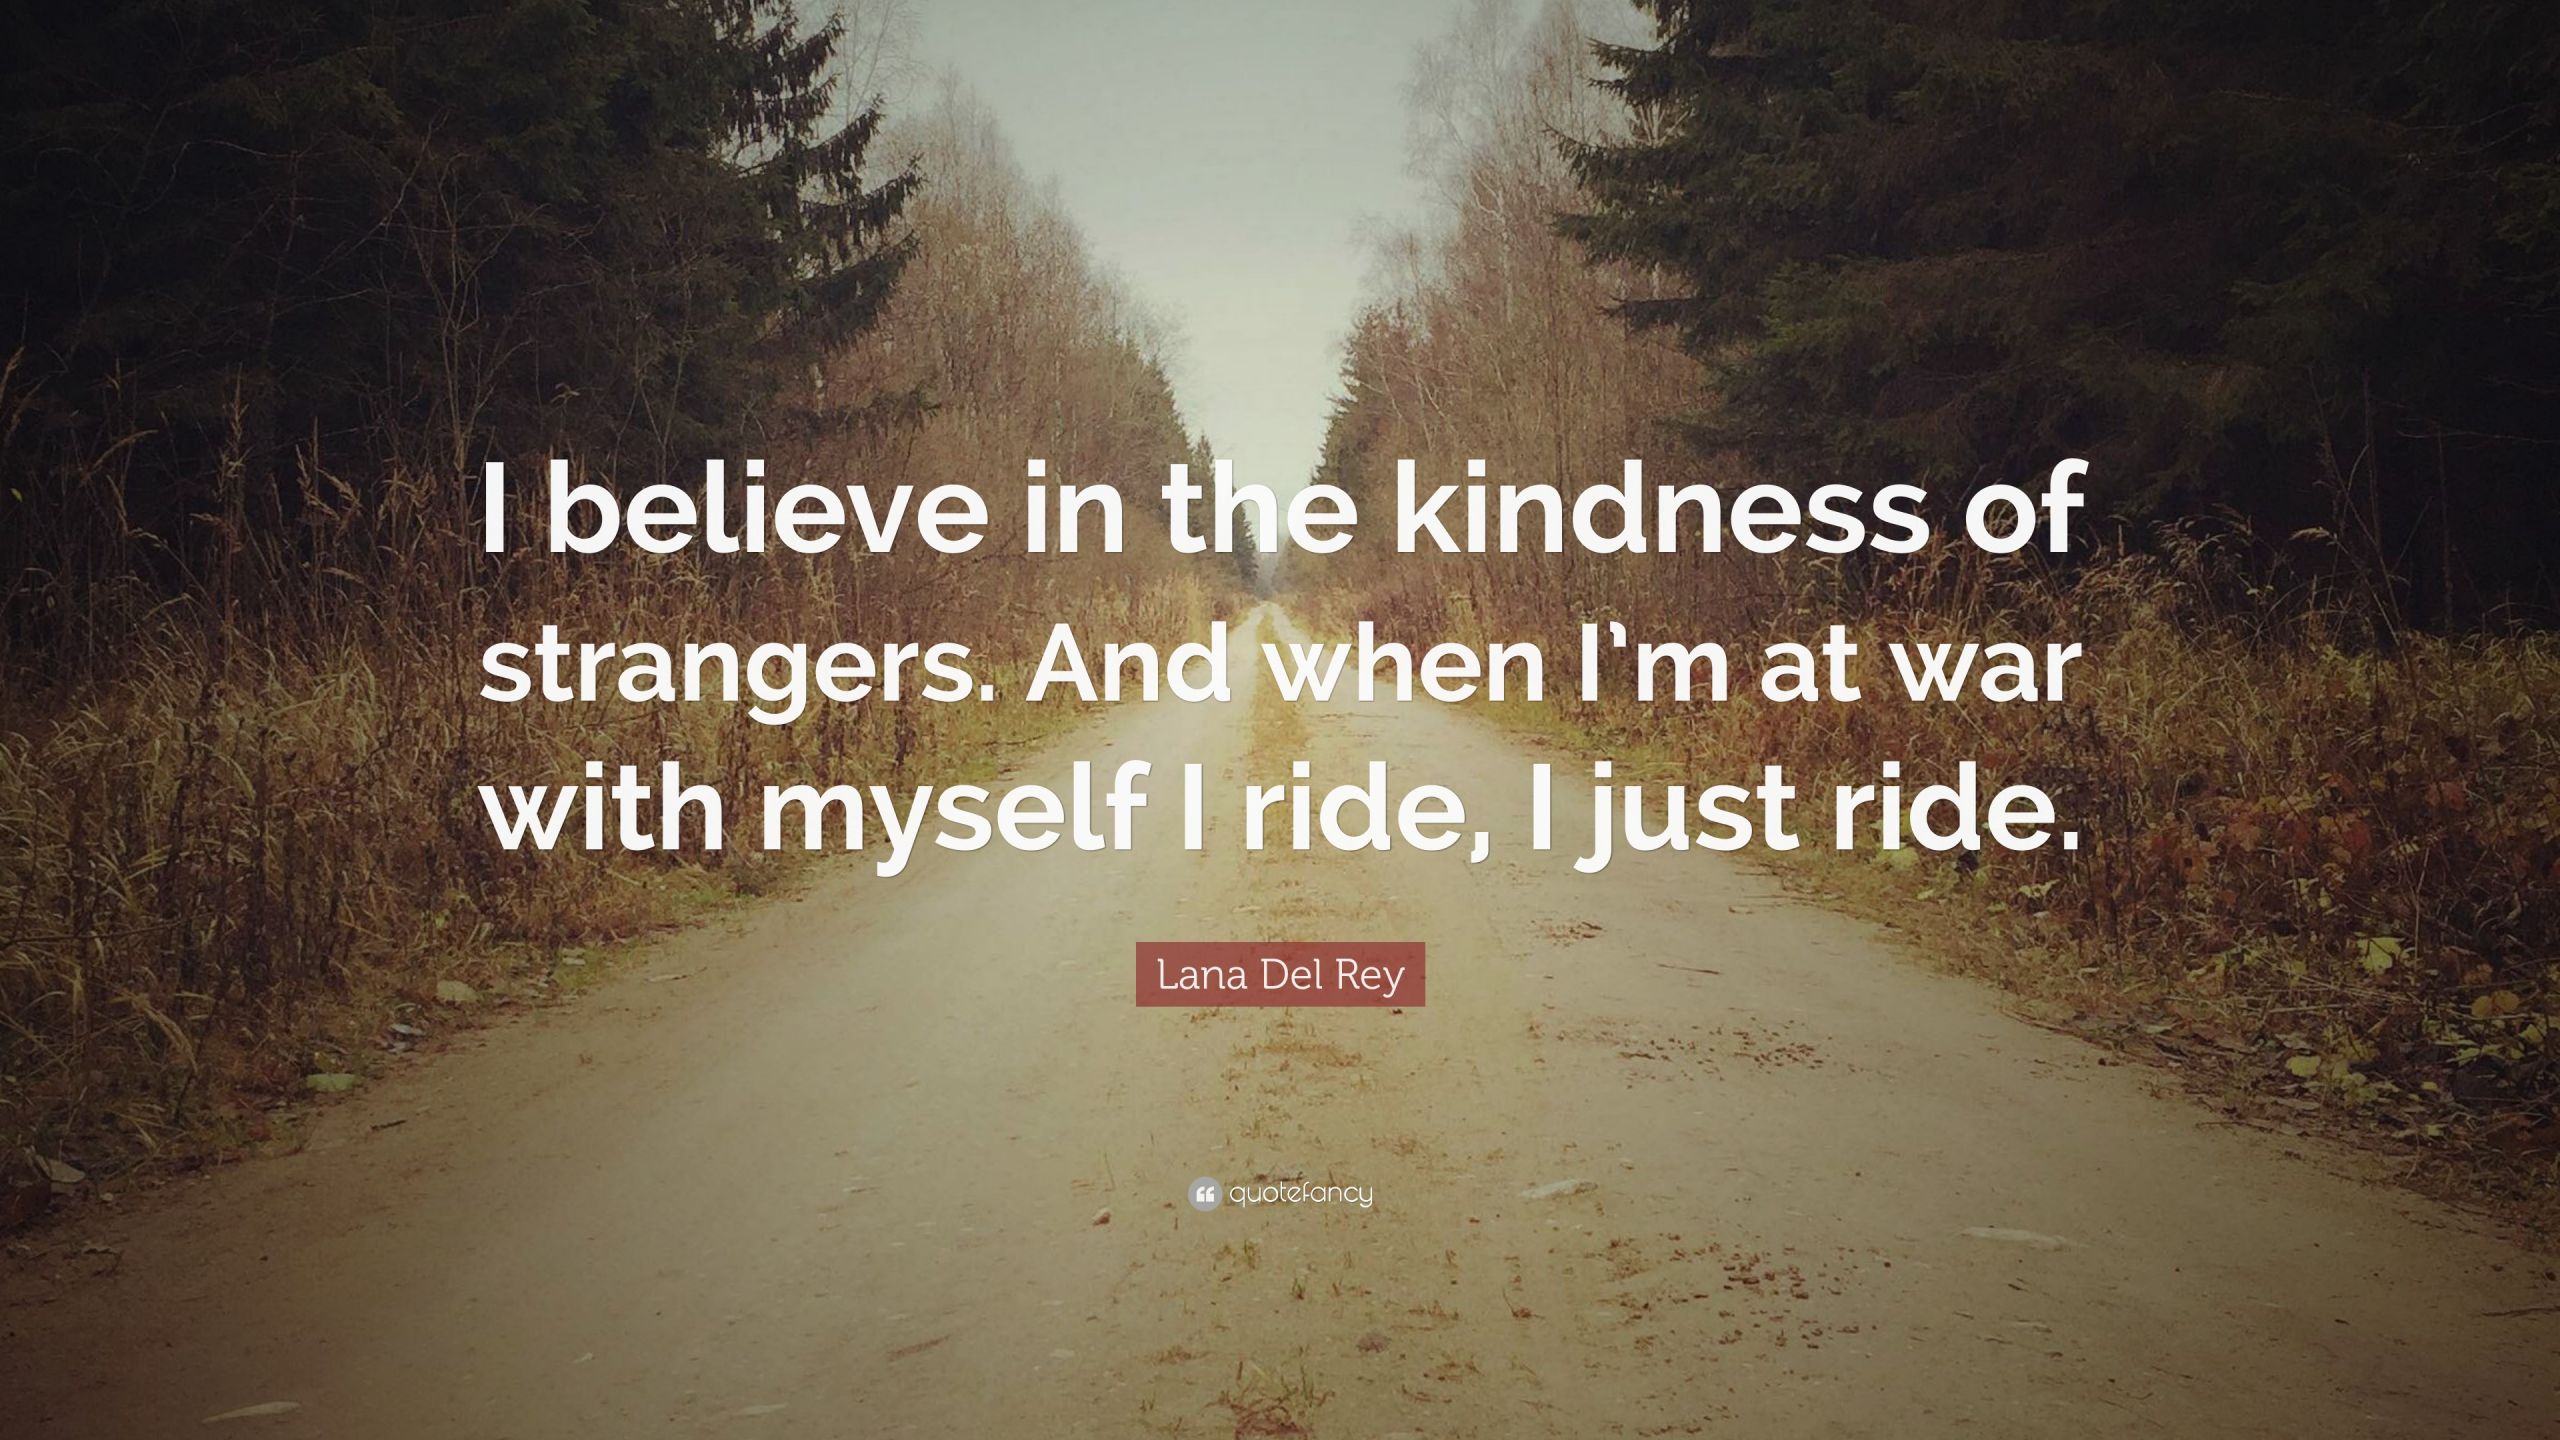 Kindness Of Strangers Quotes
 Lana Del Rey Quote “I believe in the kindness of